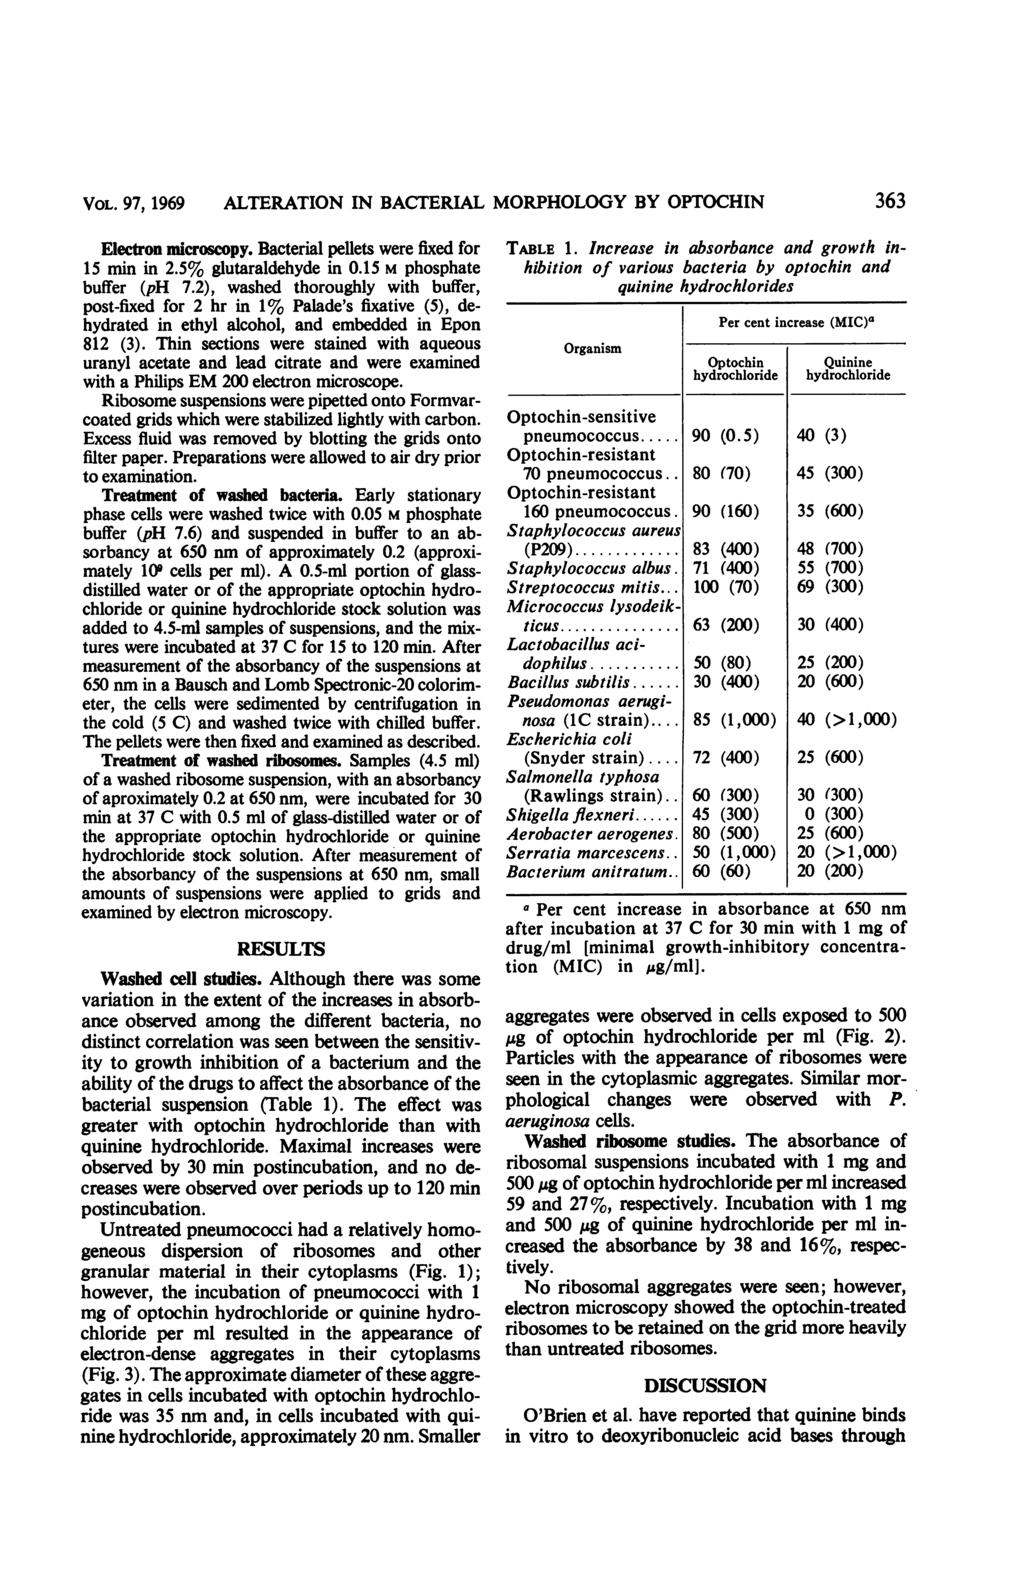 VOL. 97, 1969 ALTERATION IN BACTERIAL MORPHOLOGY BY OPTOCHIN 363 Electron microscopy. Bacterial pellets were fixed for 15 min in 2.5% glutaraldehyde in 0.15 M phosphate buffer (ph 7.